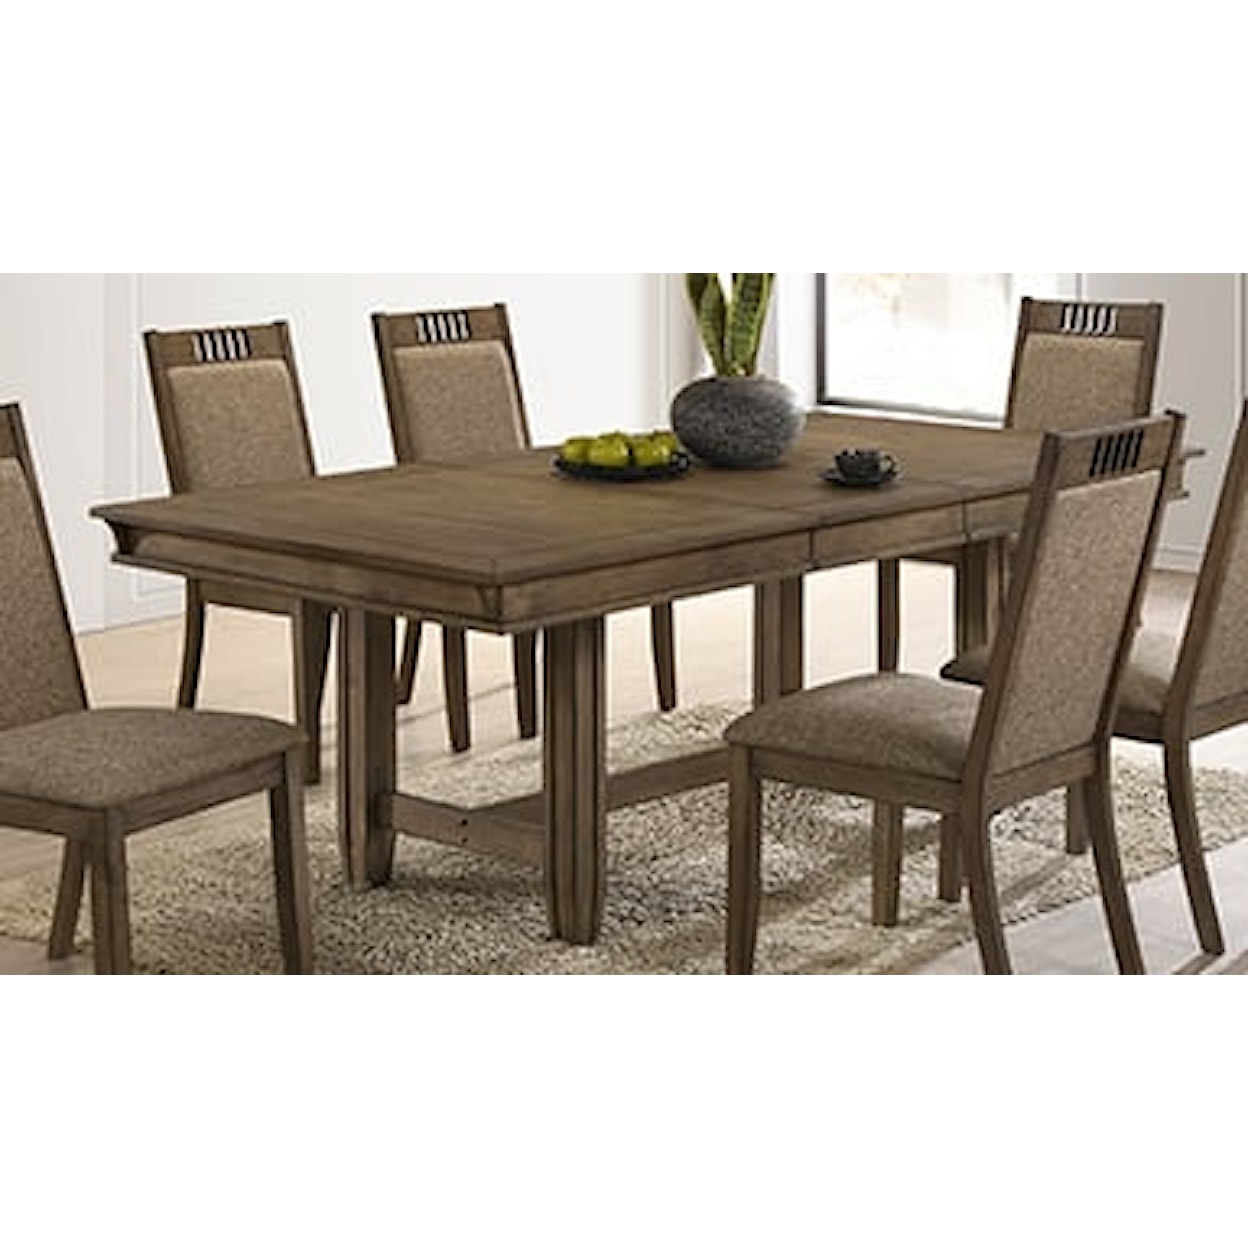 New Classic Portofino Dining Table with Leaf